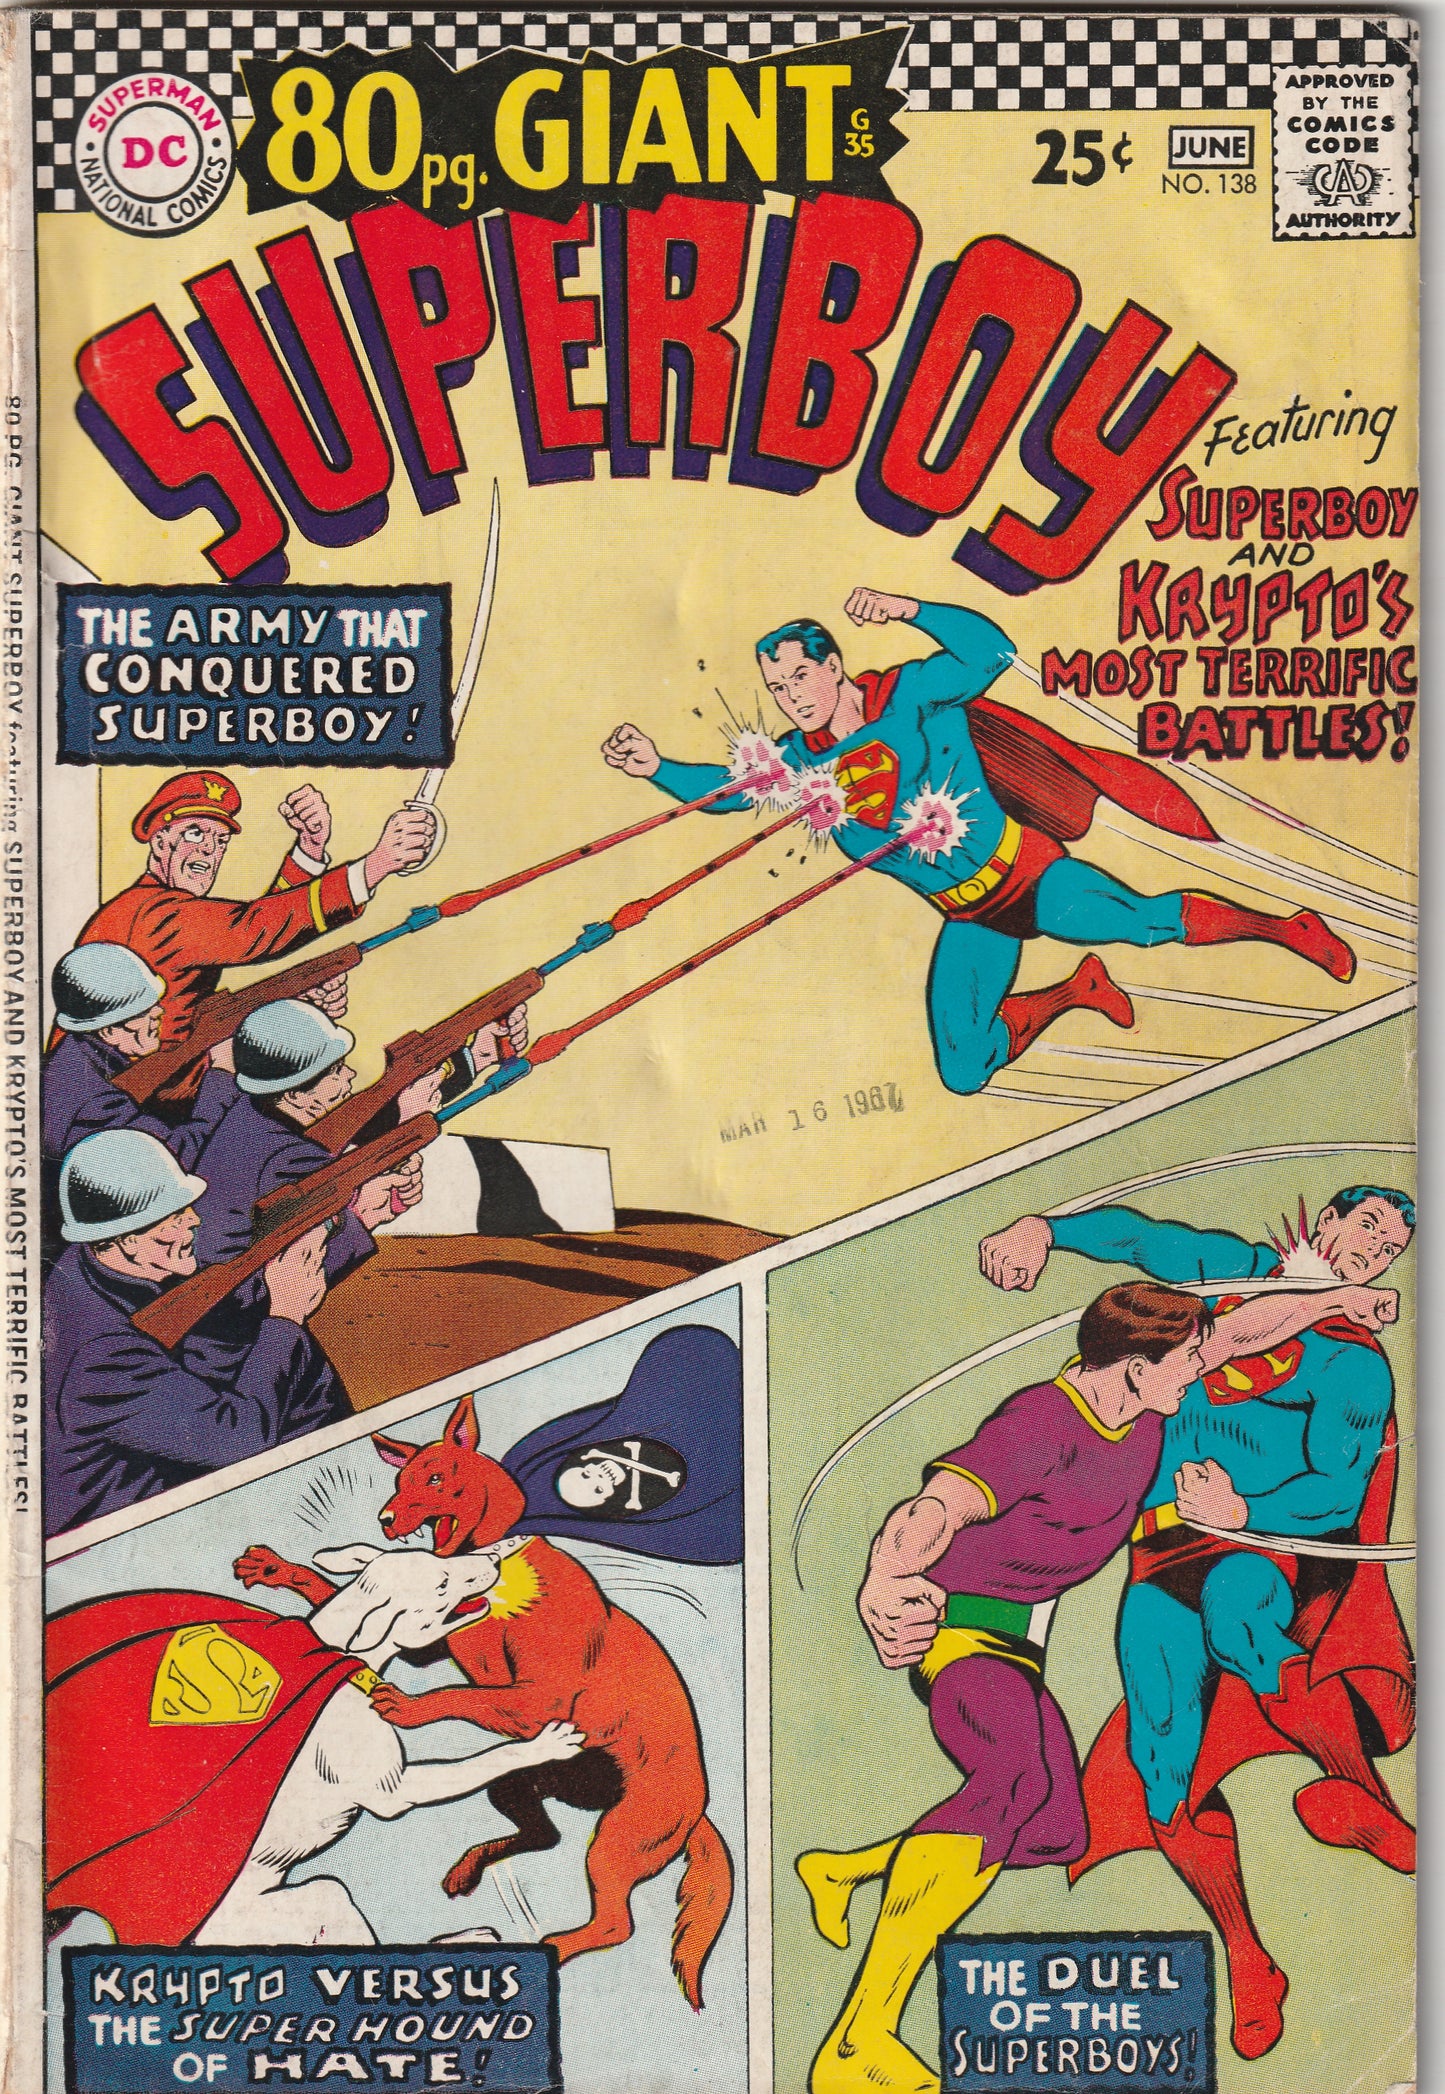 Superboy #138 (1967) - 80 Page Giant